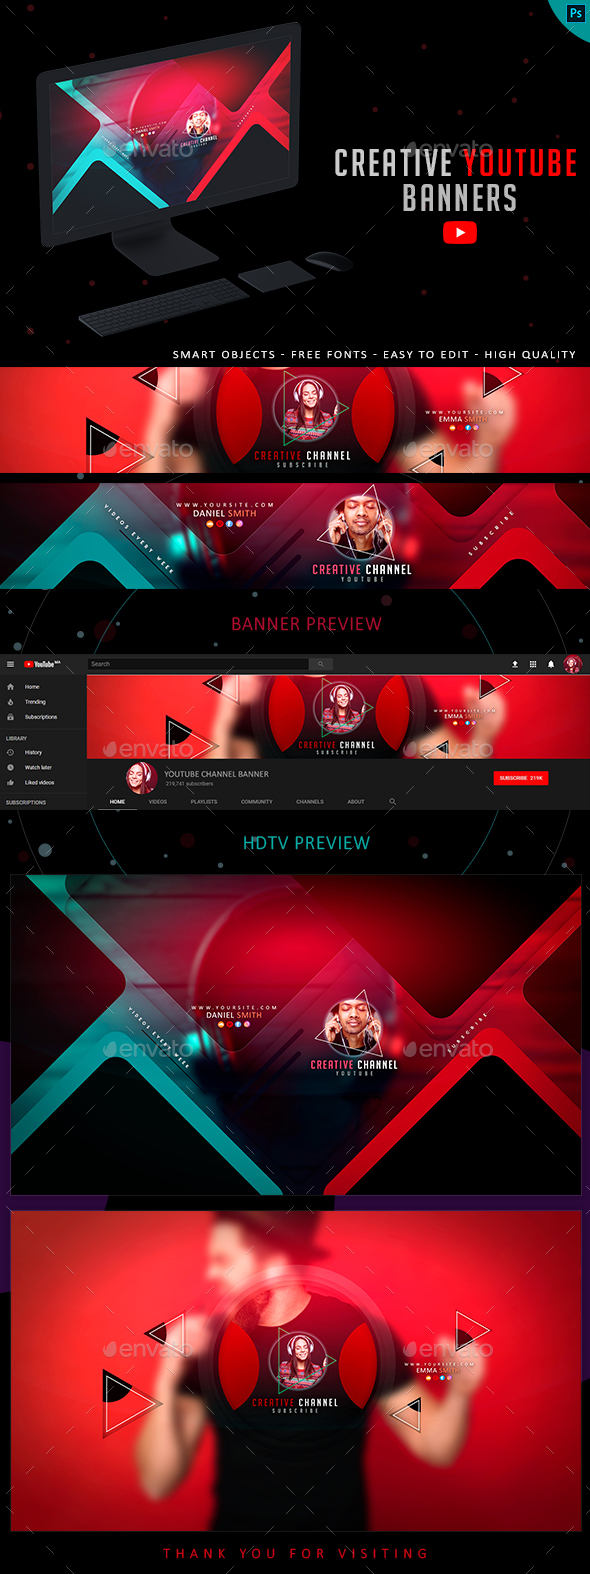 Youtube Banner Music Graphics Designs Templates